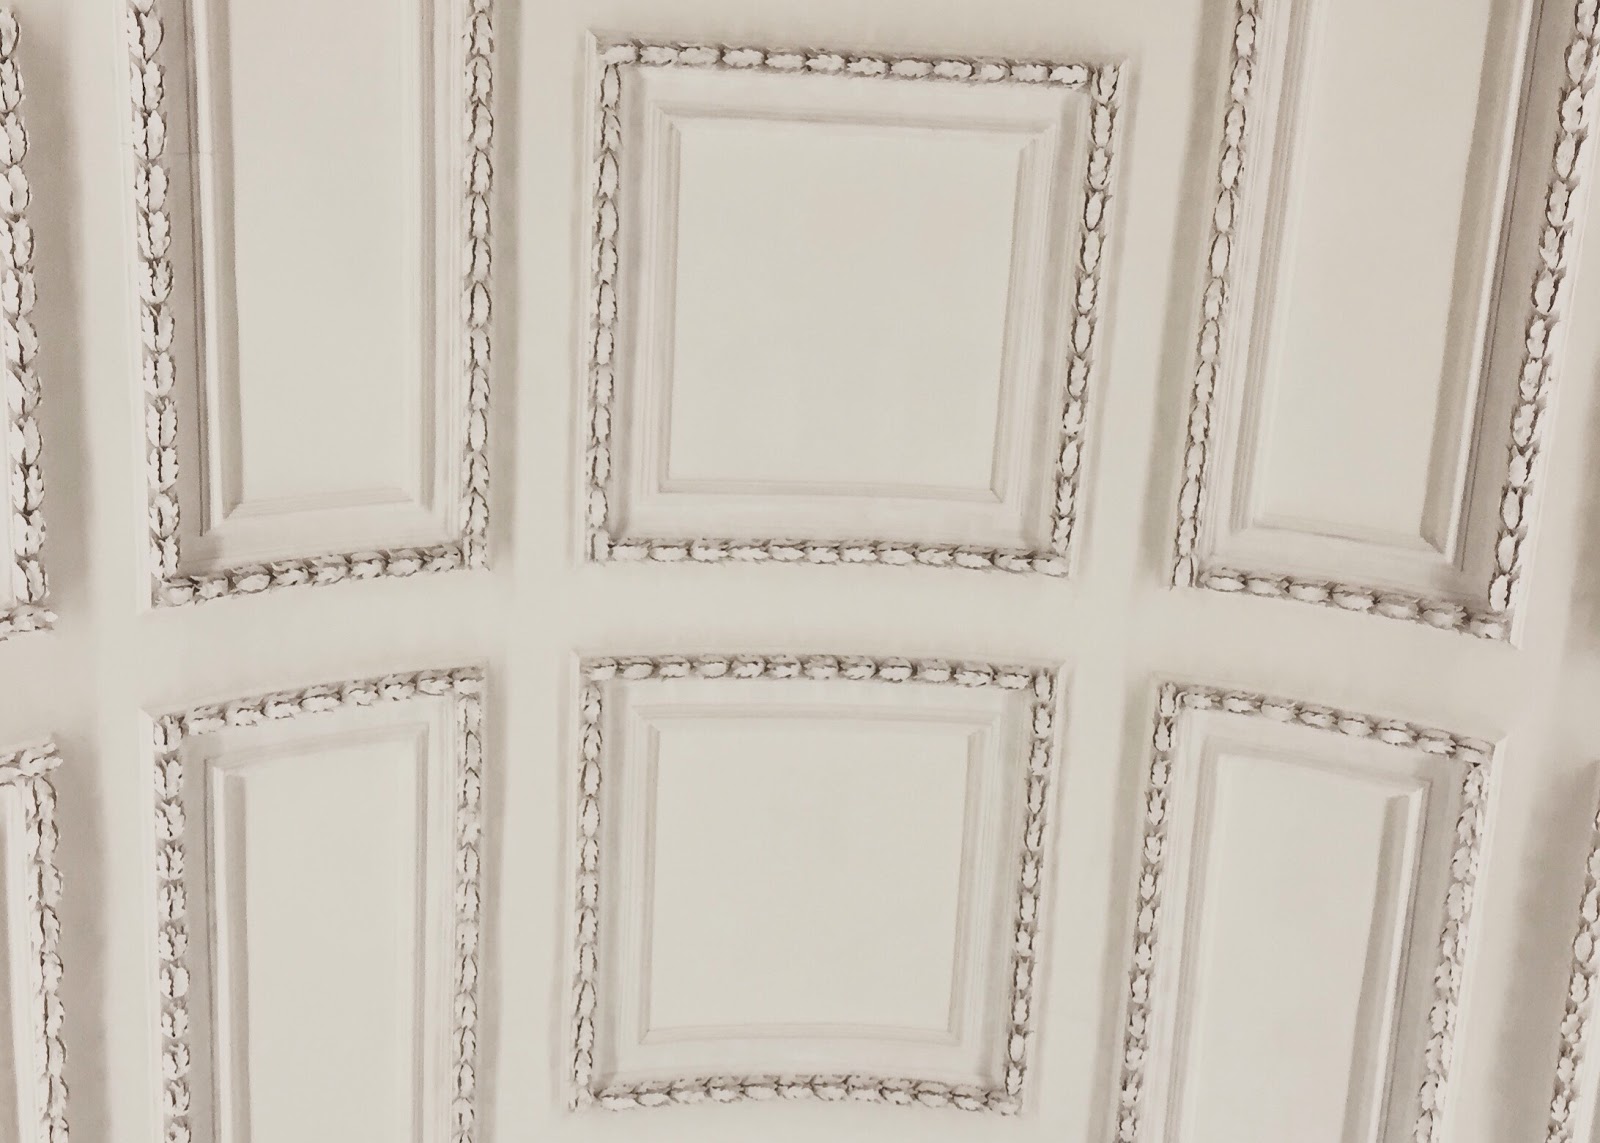 Vintage decorated ceiling